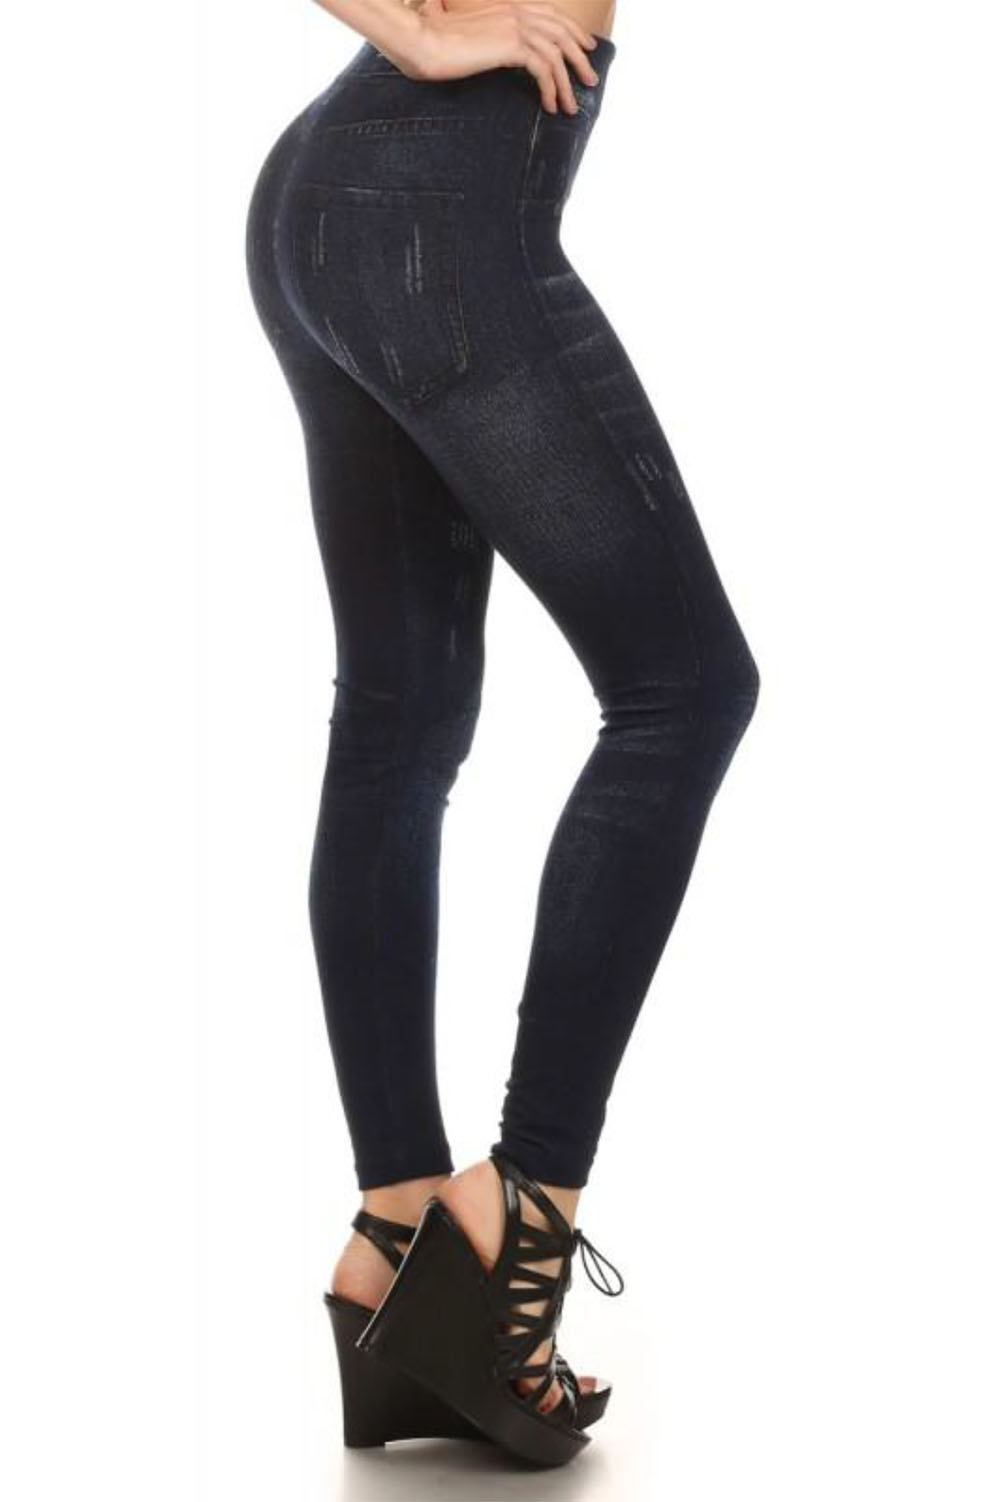 leggings that look like stretch jeans with